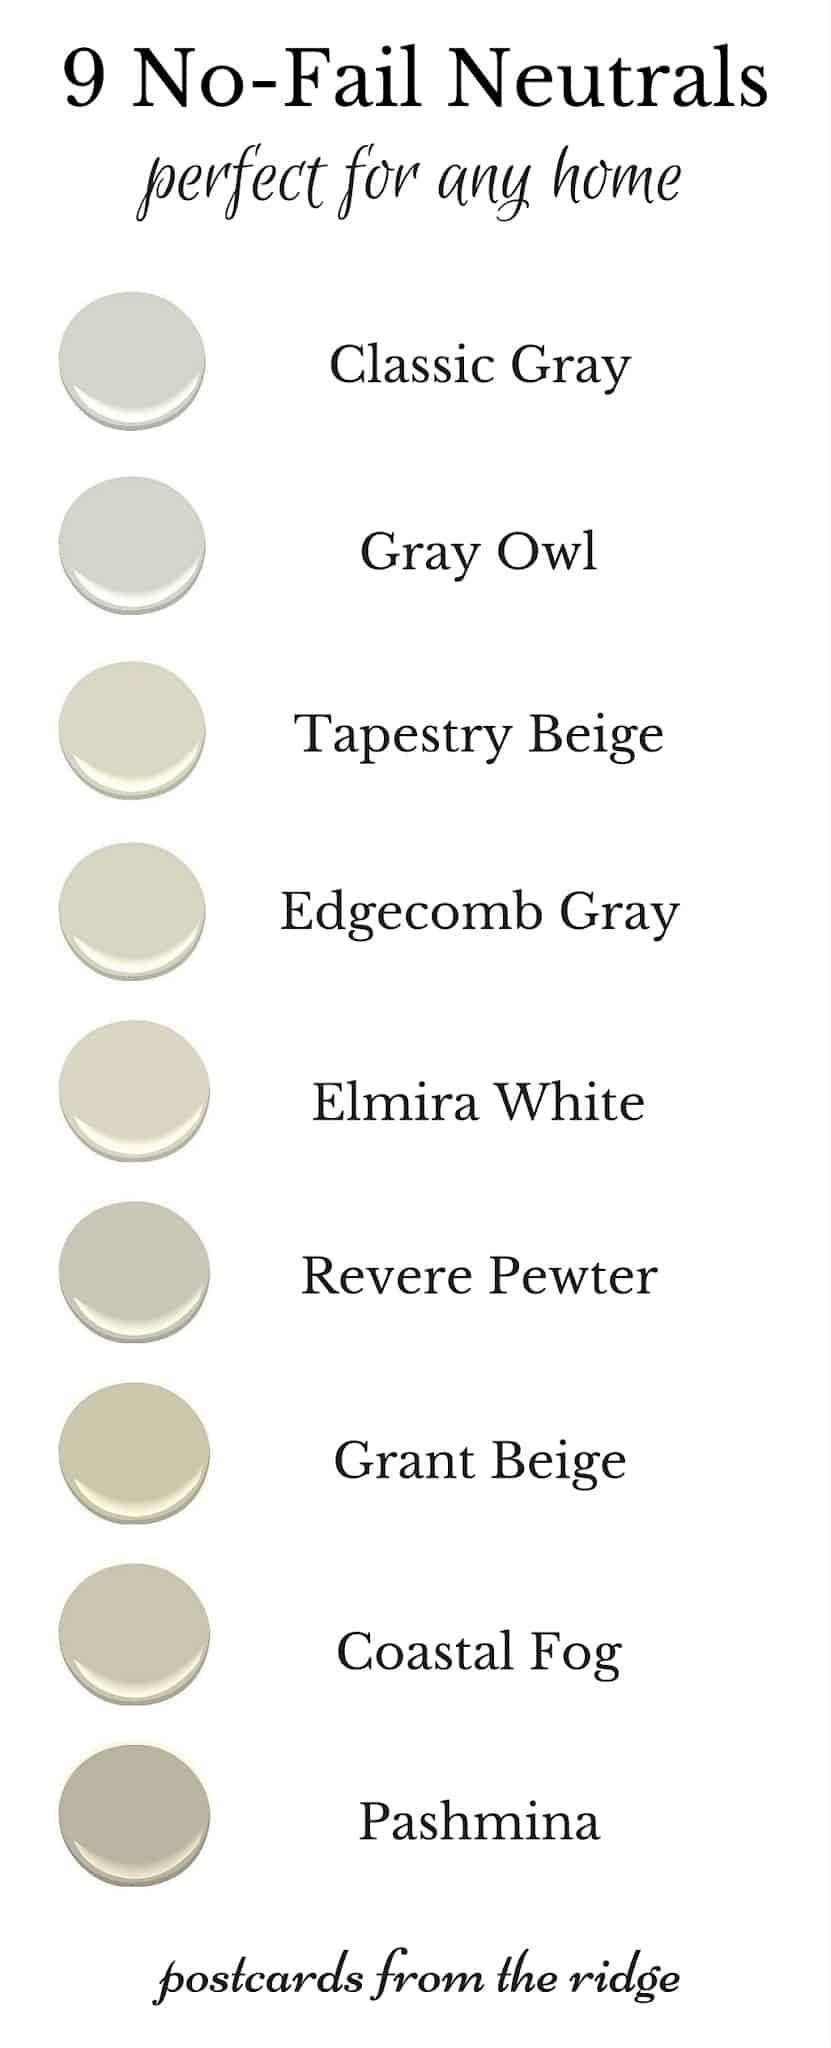 These are the best neutral paint colors. Lots of great photos of each one. So glad to have this. - Postcards from the Ridge